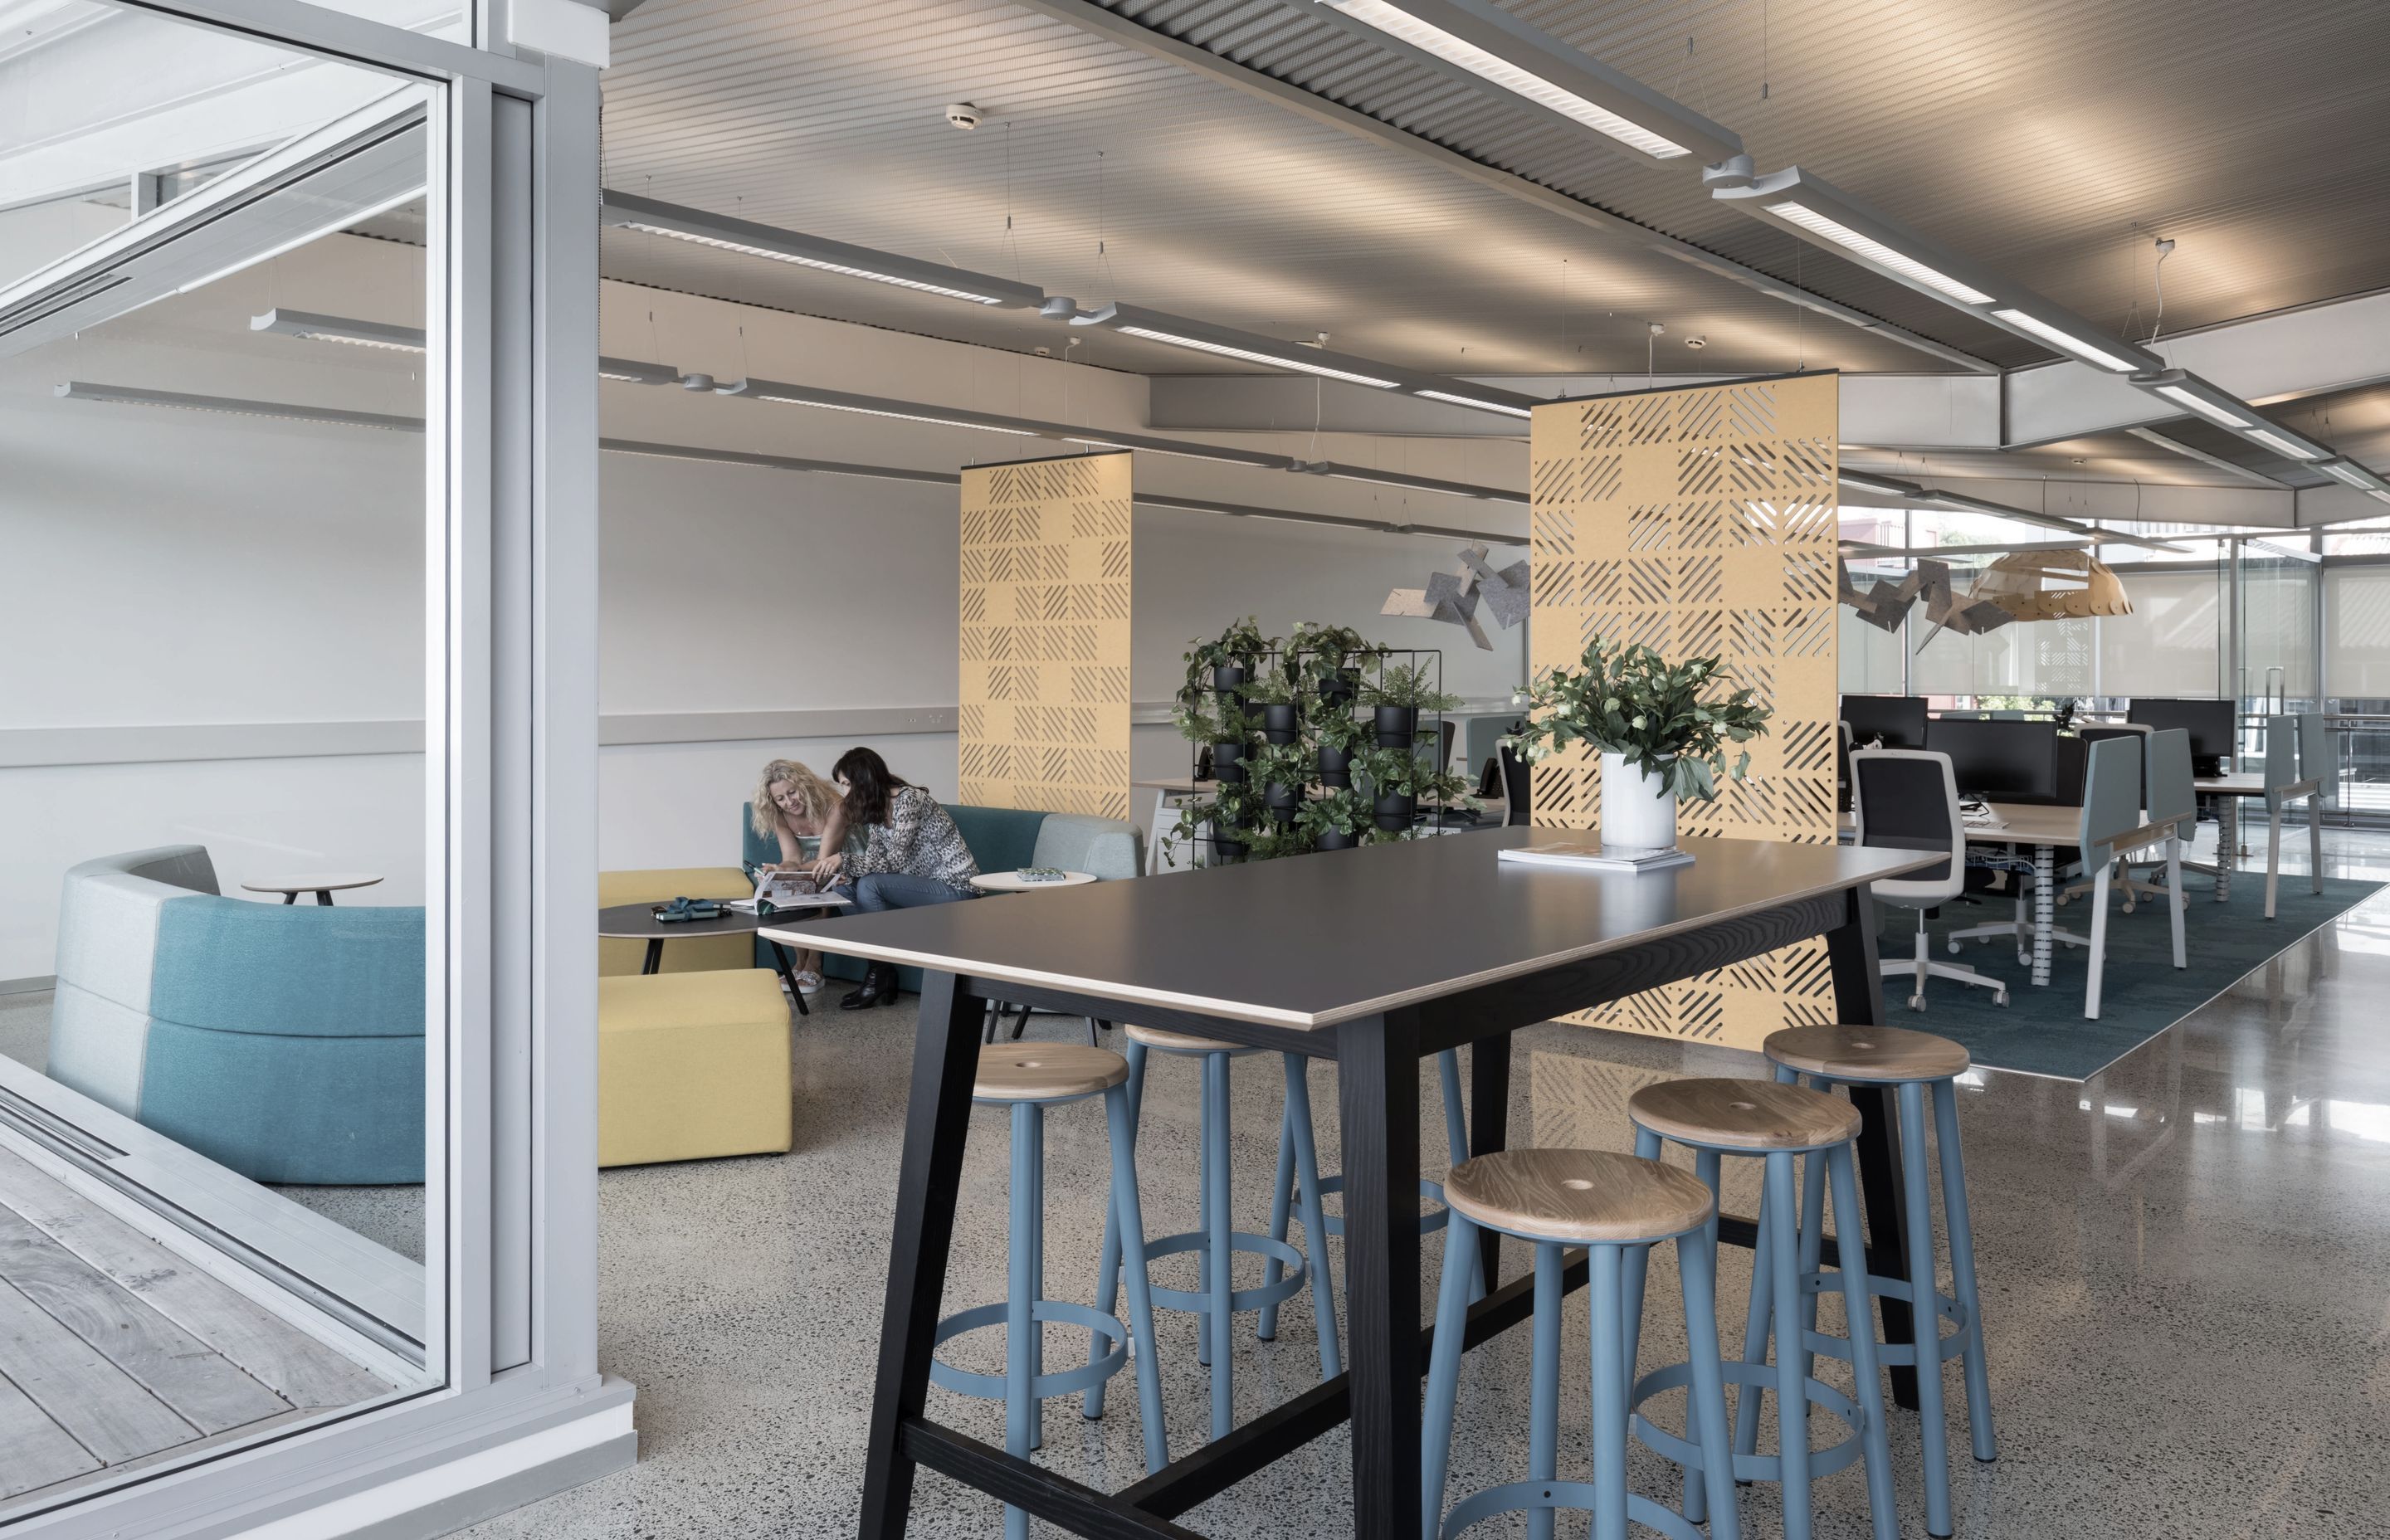 Quality and colour for this space in Parnell, delineated the workpoints with vibrant carpet to assist with noise dampening, and suspended graphic acoustic pendants above, adding acoustic/visual screening drops between work and meeting spaces.